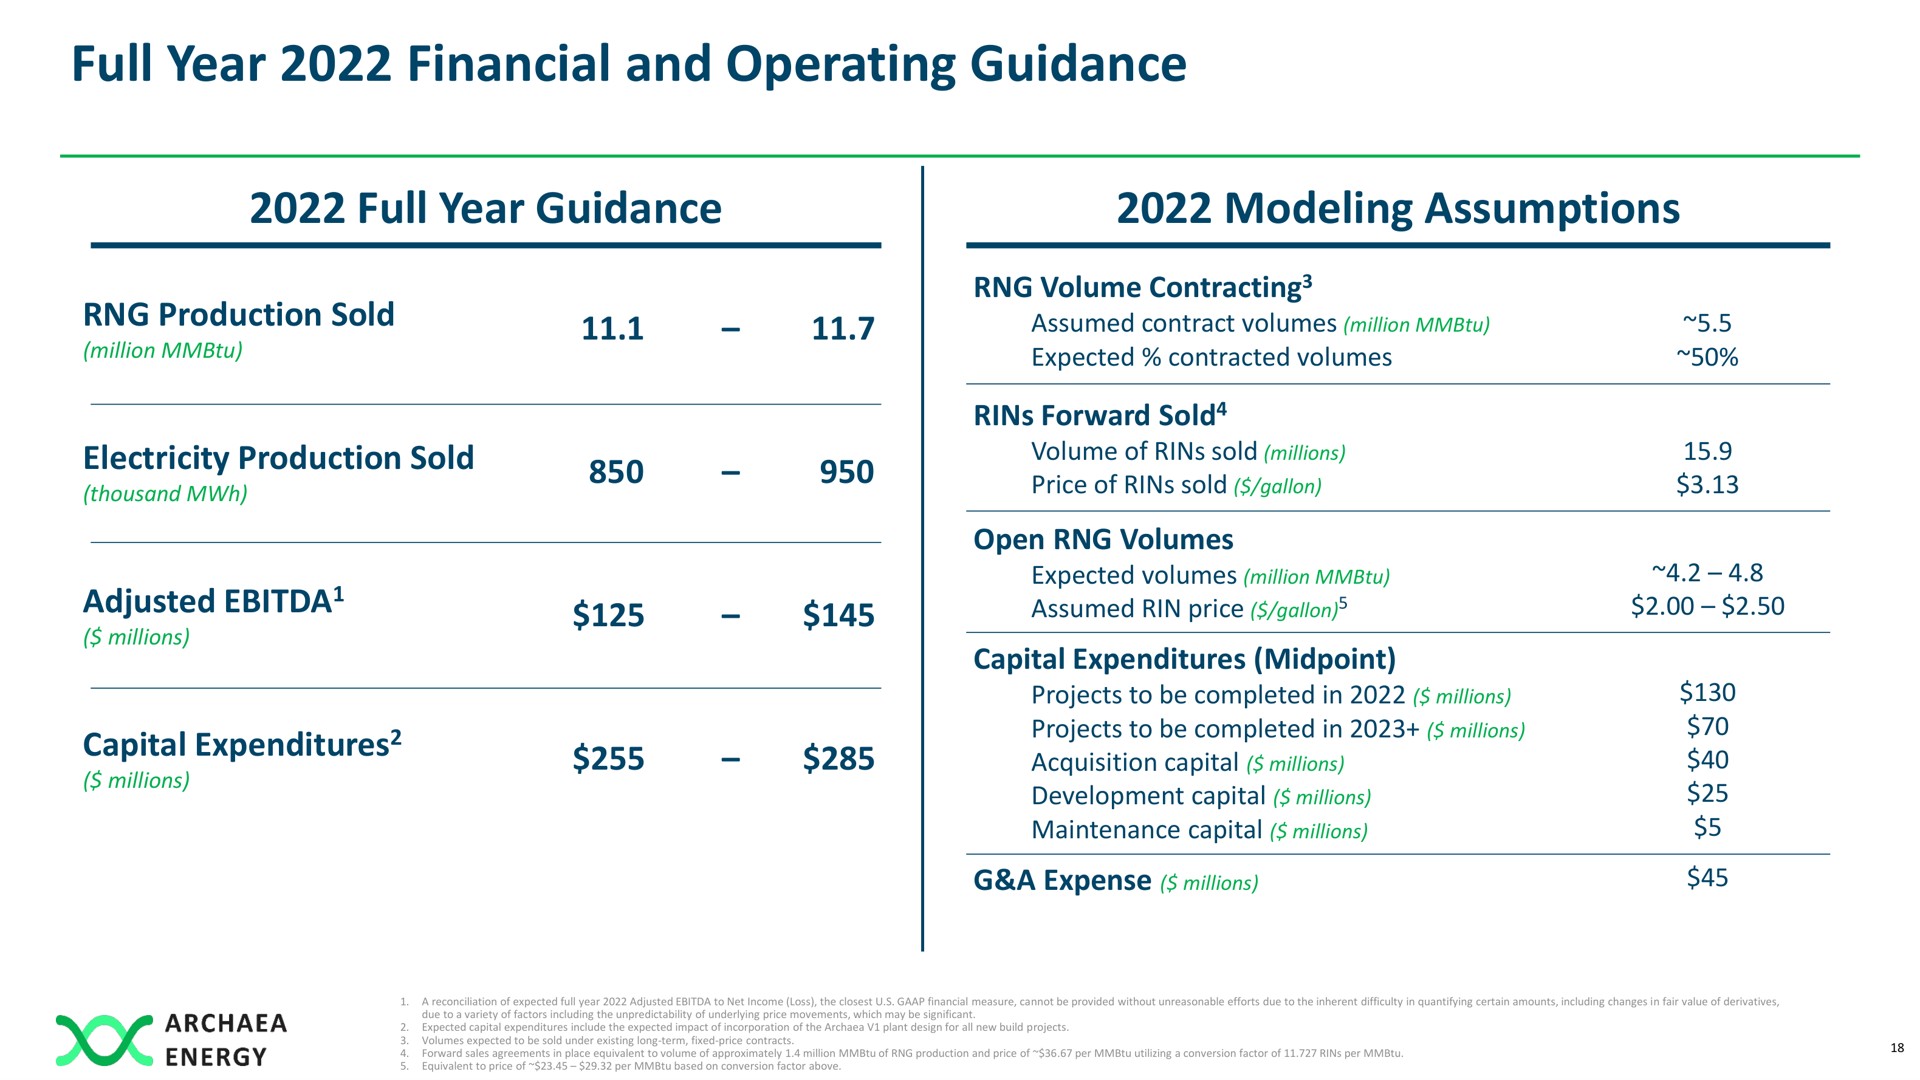 full year financial and operating guidance full year guidance modeling assumptions capital expenditures | Archaea Energy